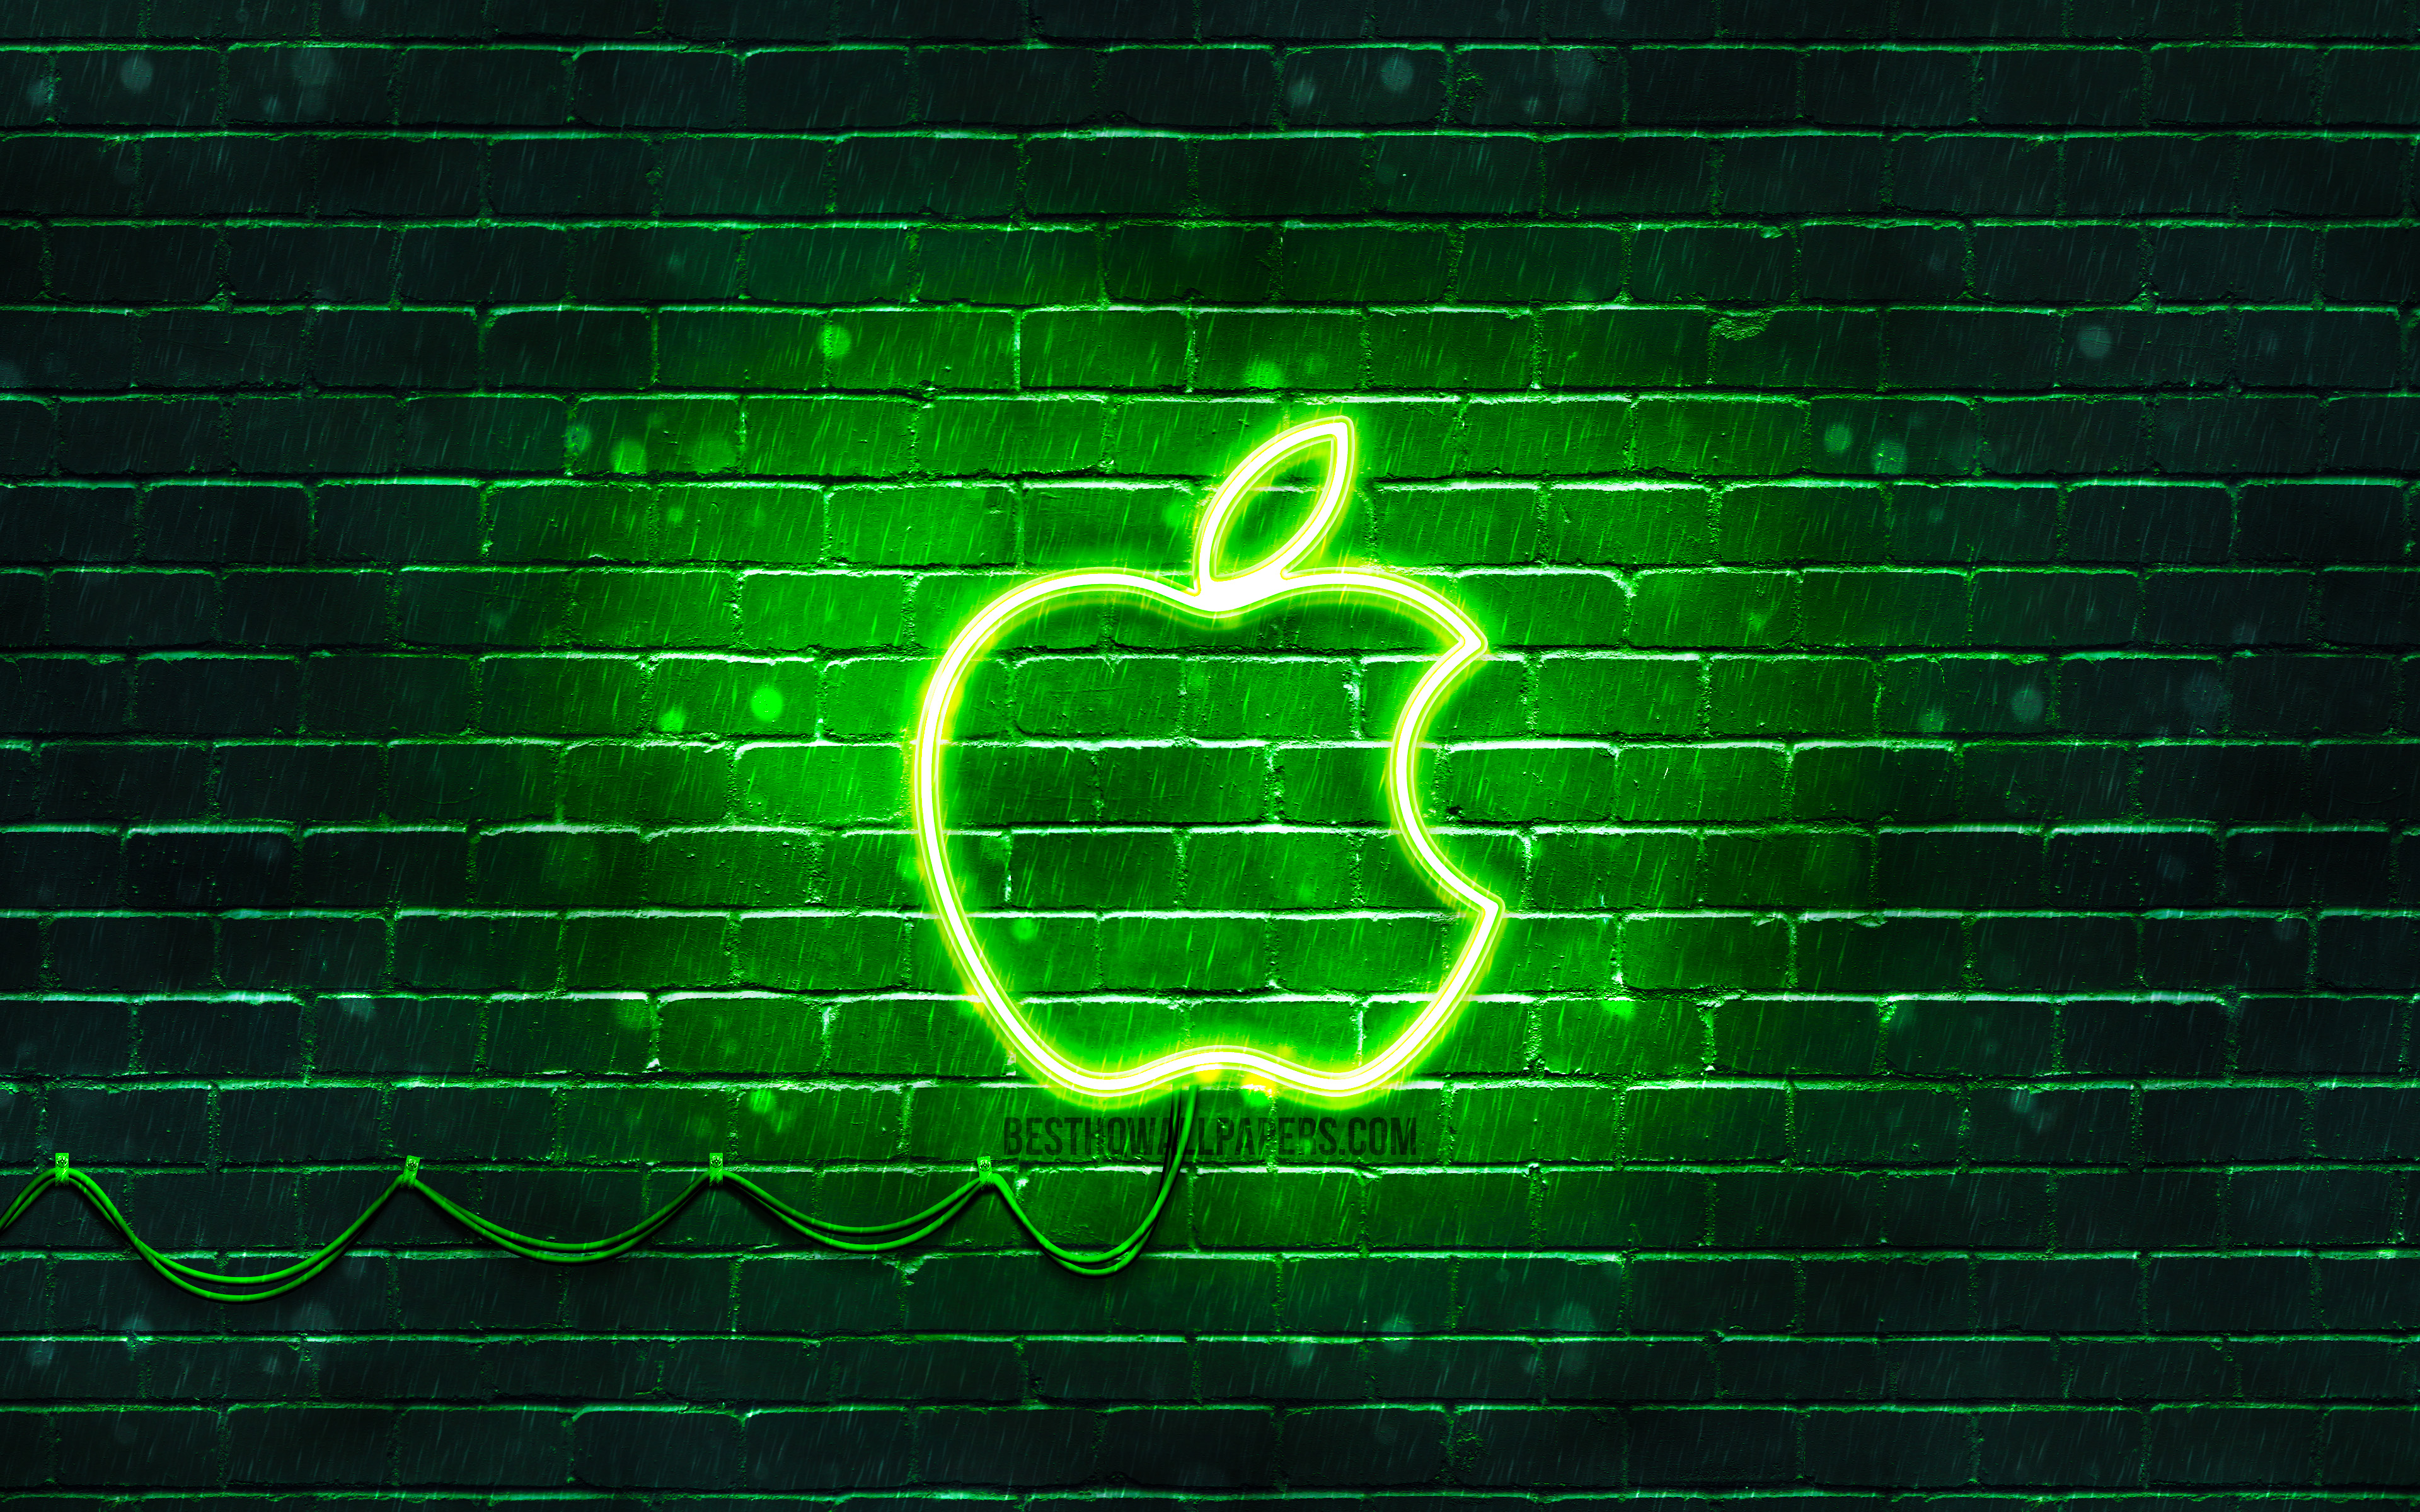 Download wallpaper Apple green logo, 4k, green brickwall, green neon apple, Apple logo, brands, Apple neon logo, Apple for desktop with resolution 3840x2400. High Quality HD picture wallpaper